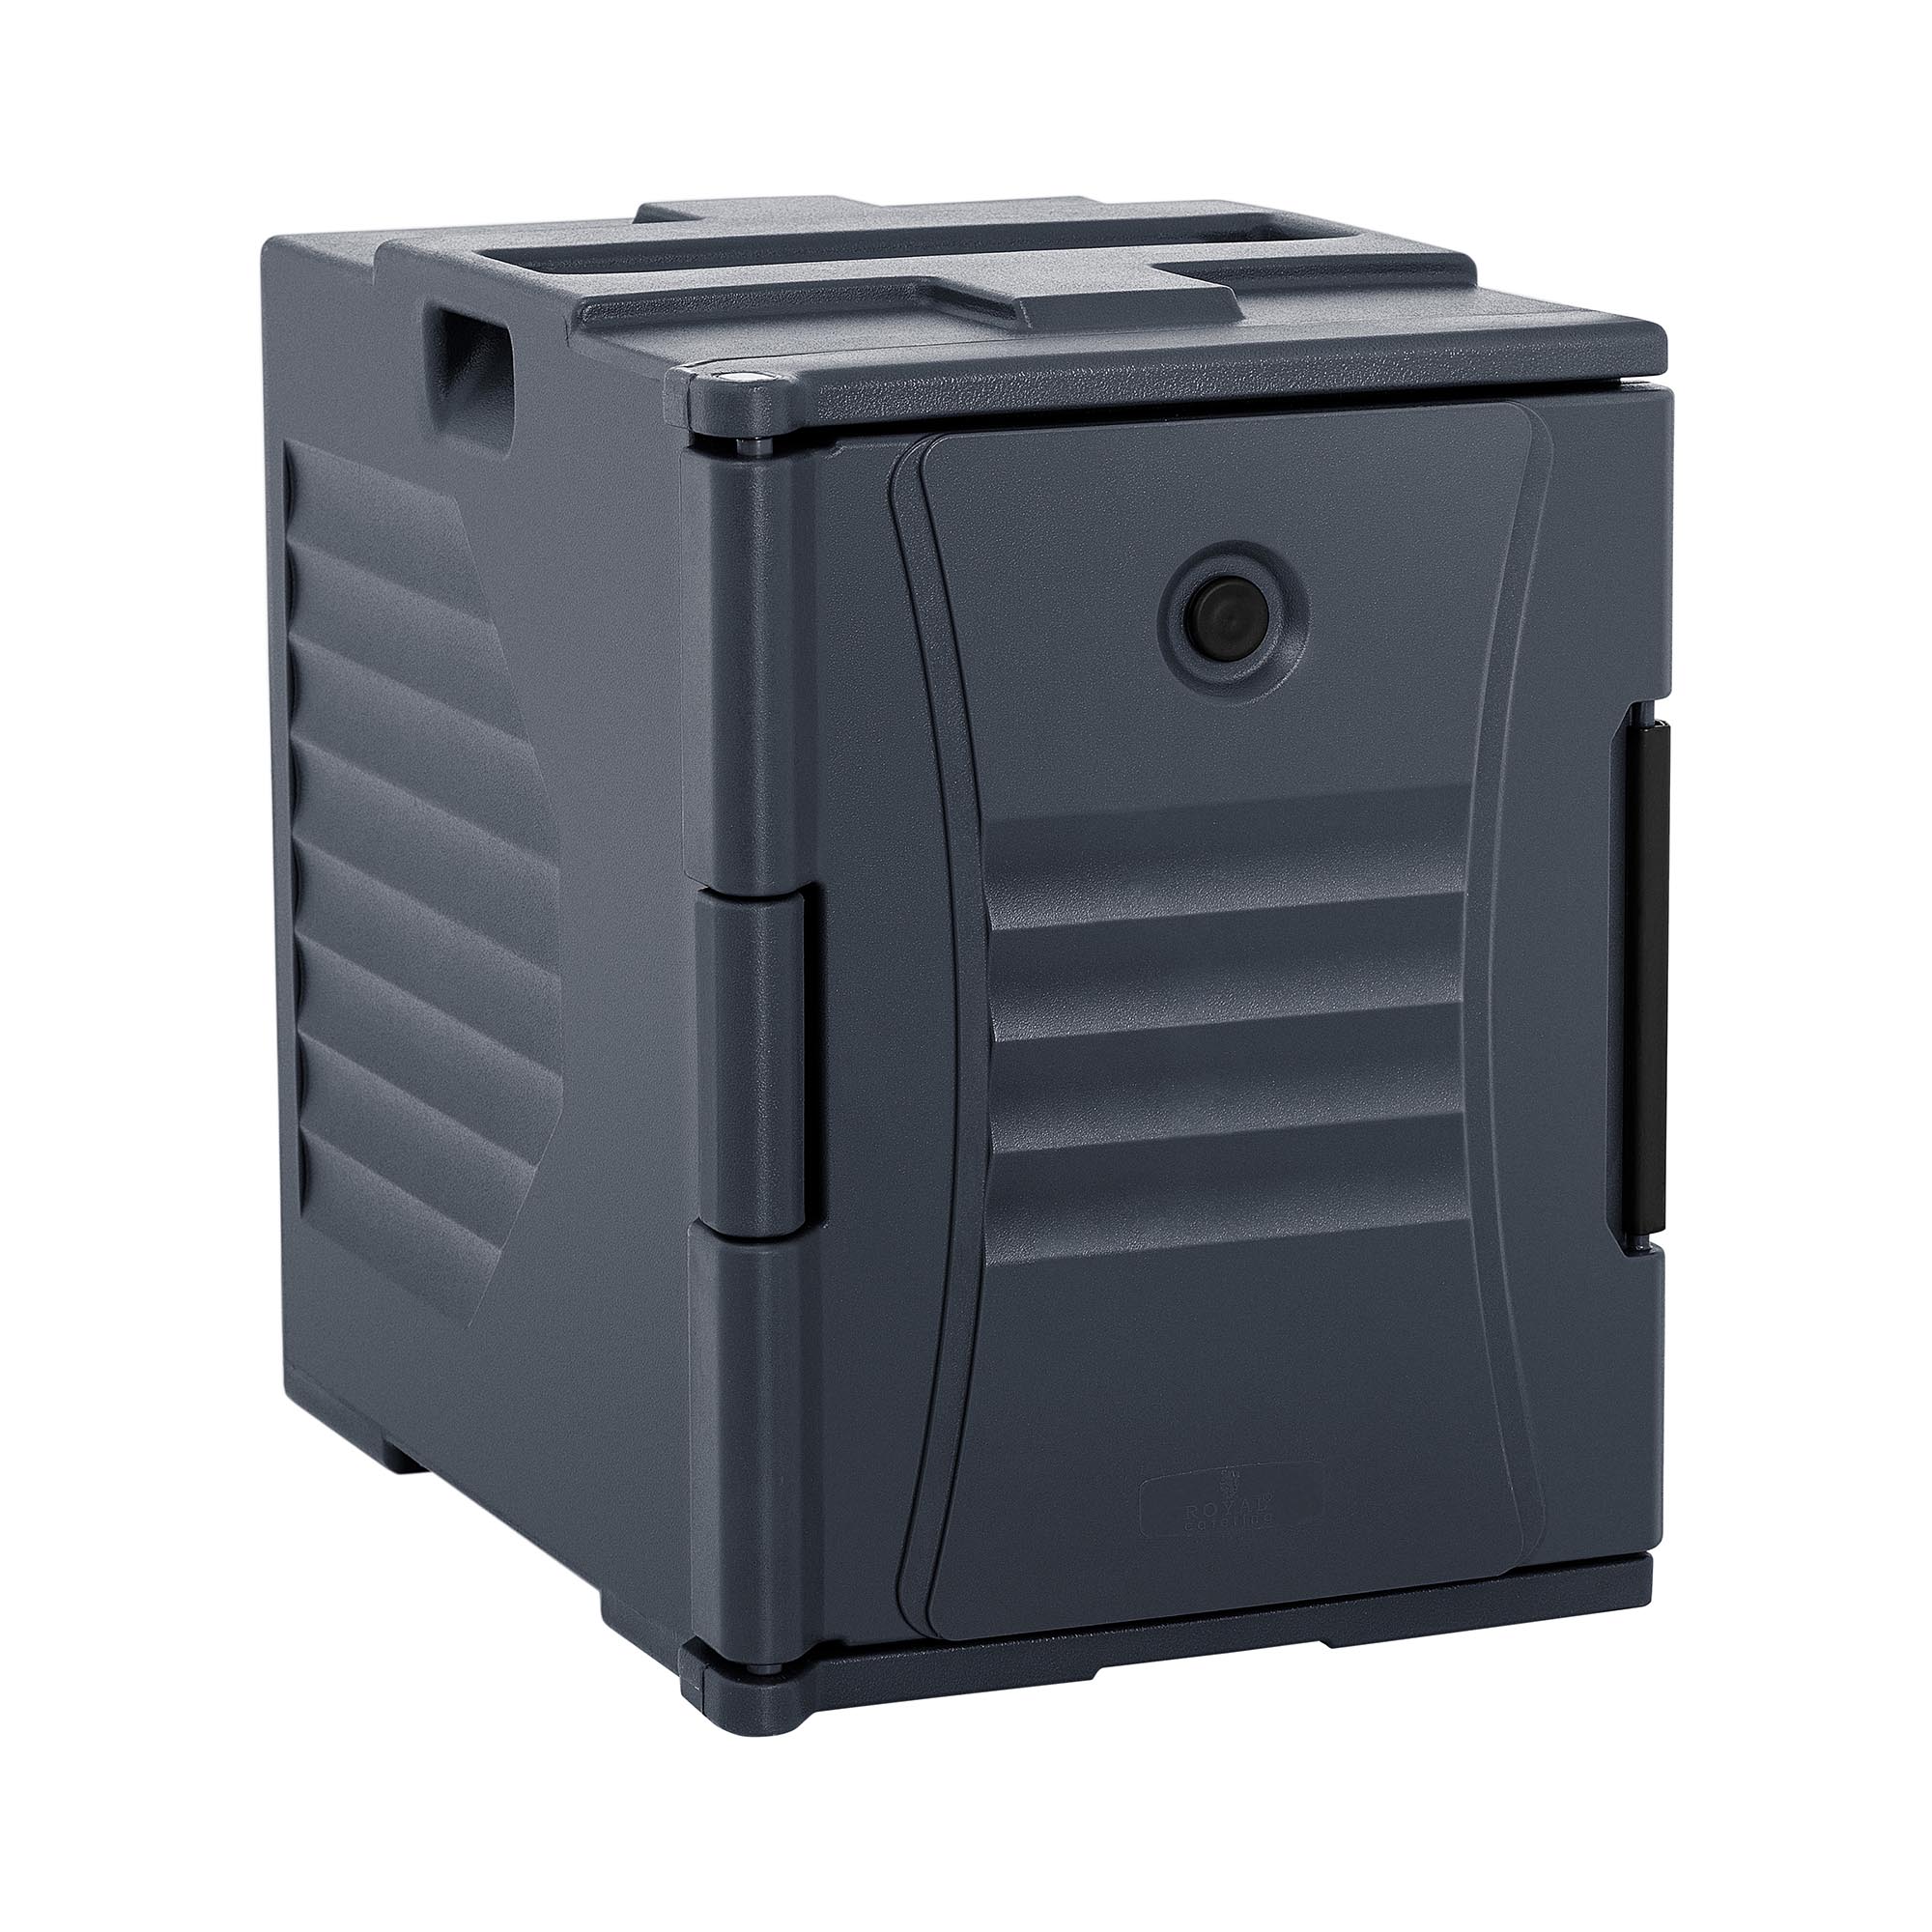 Royal Catering Thermo Box - front loader - for 2 GN 1/1 containers (20 cm deep)